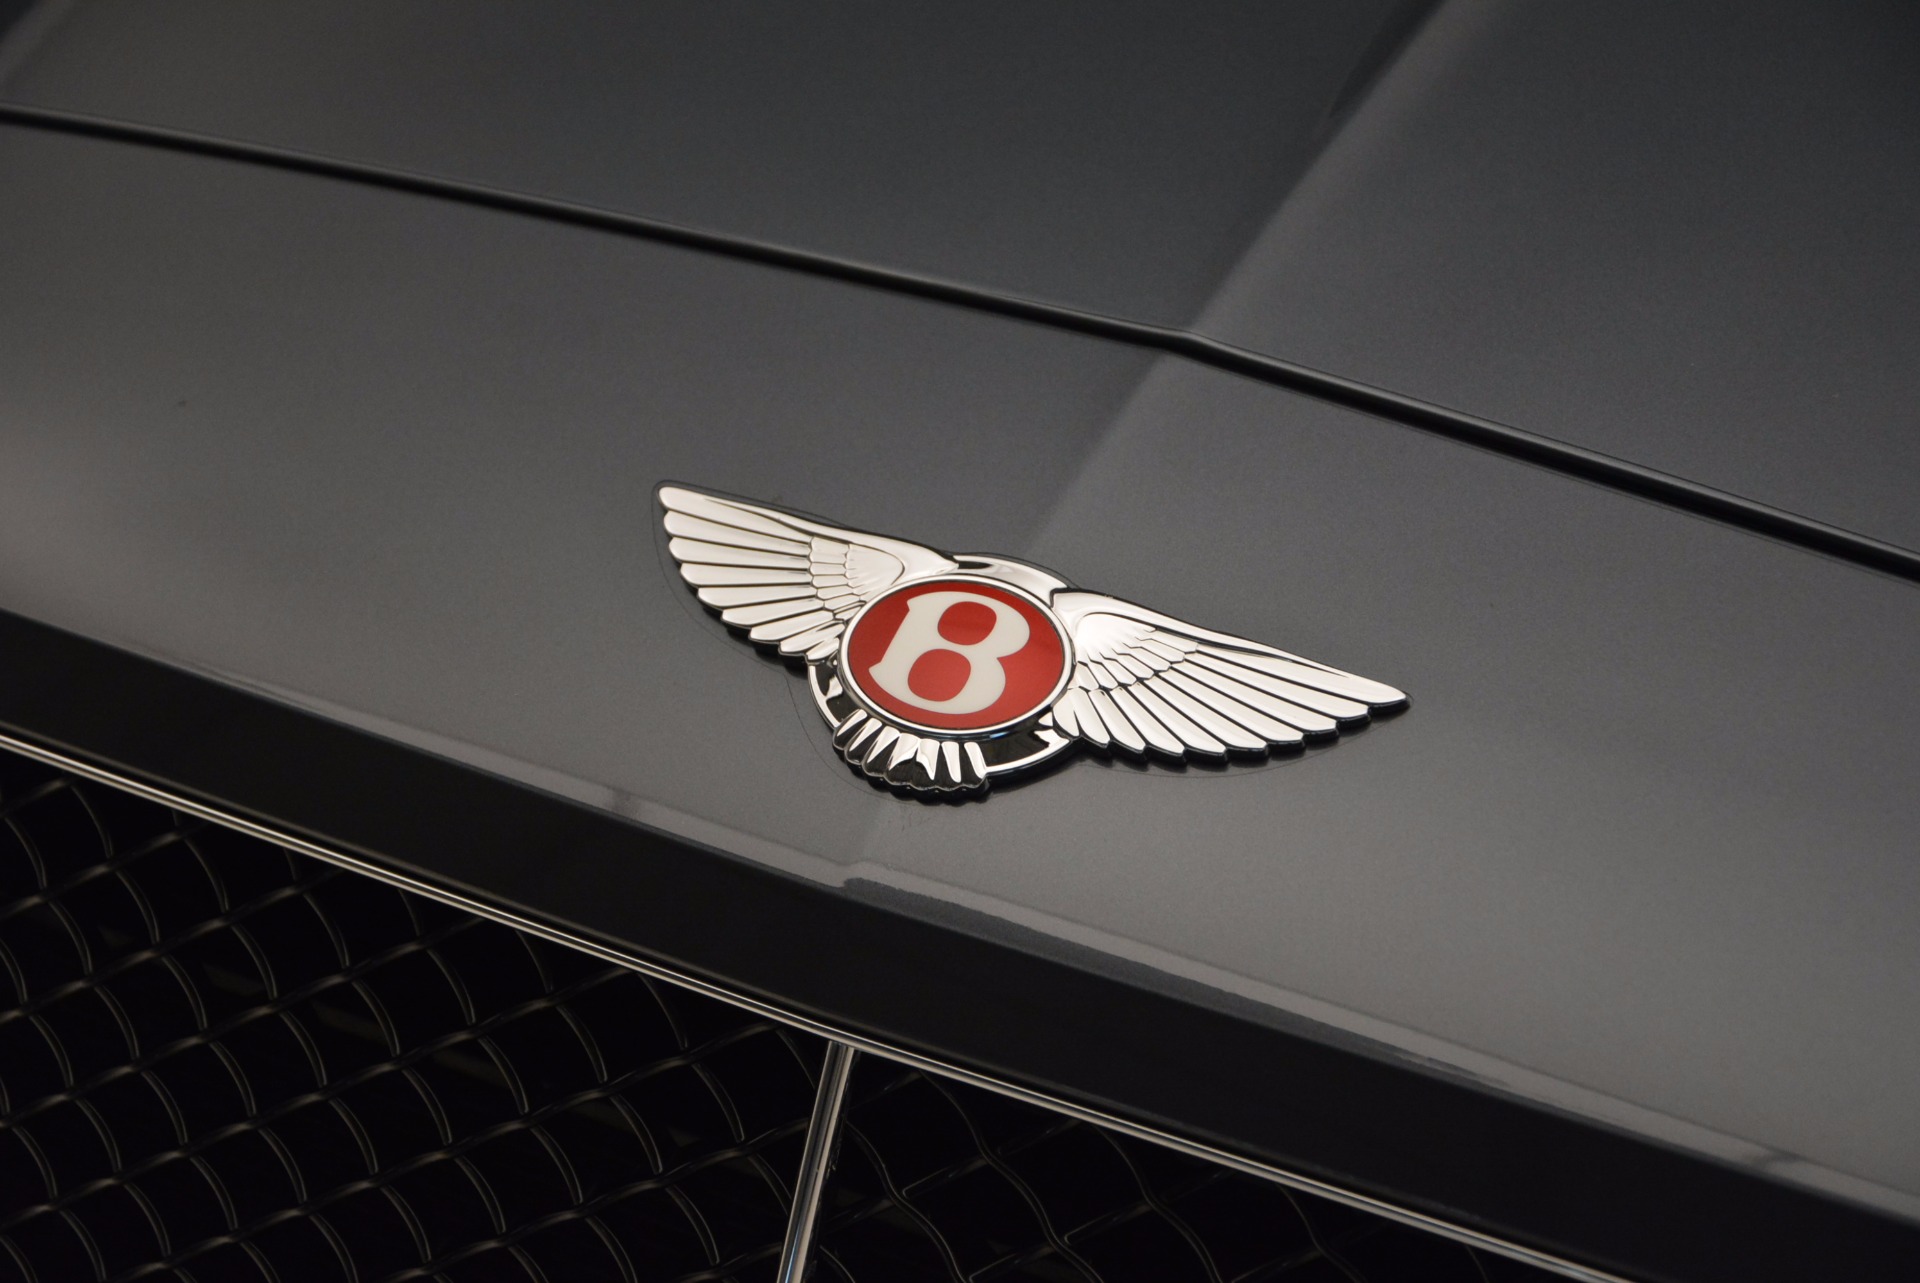 Used 2014 Bentley Continental GT V8